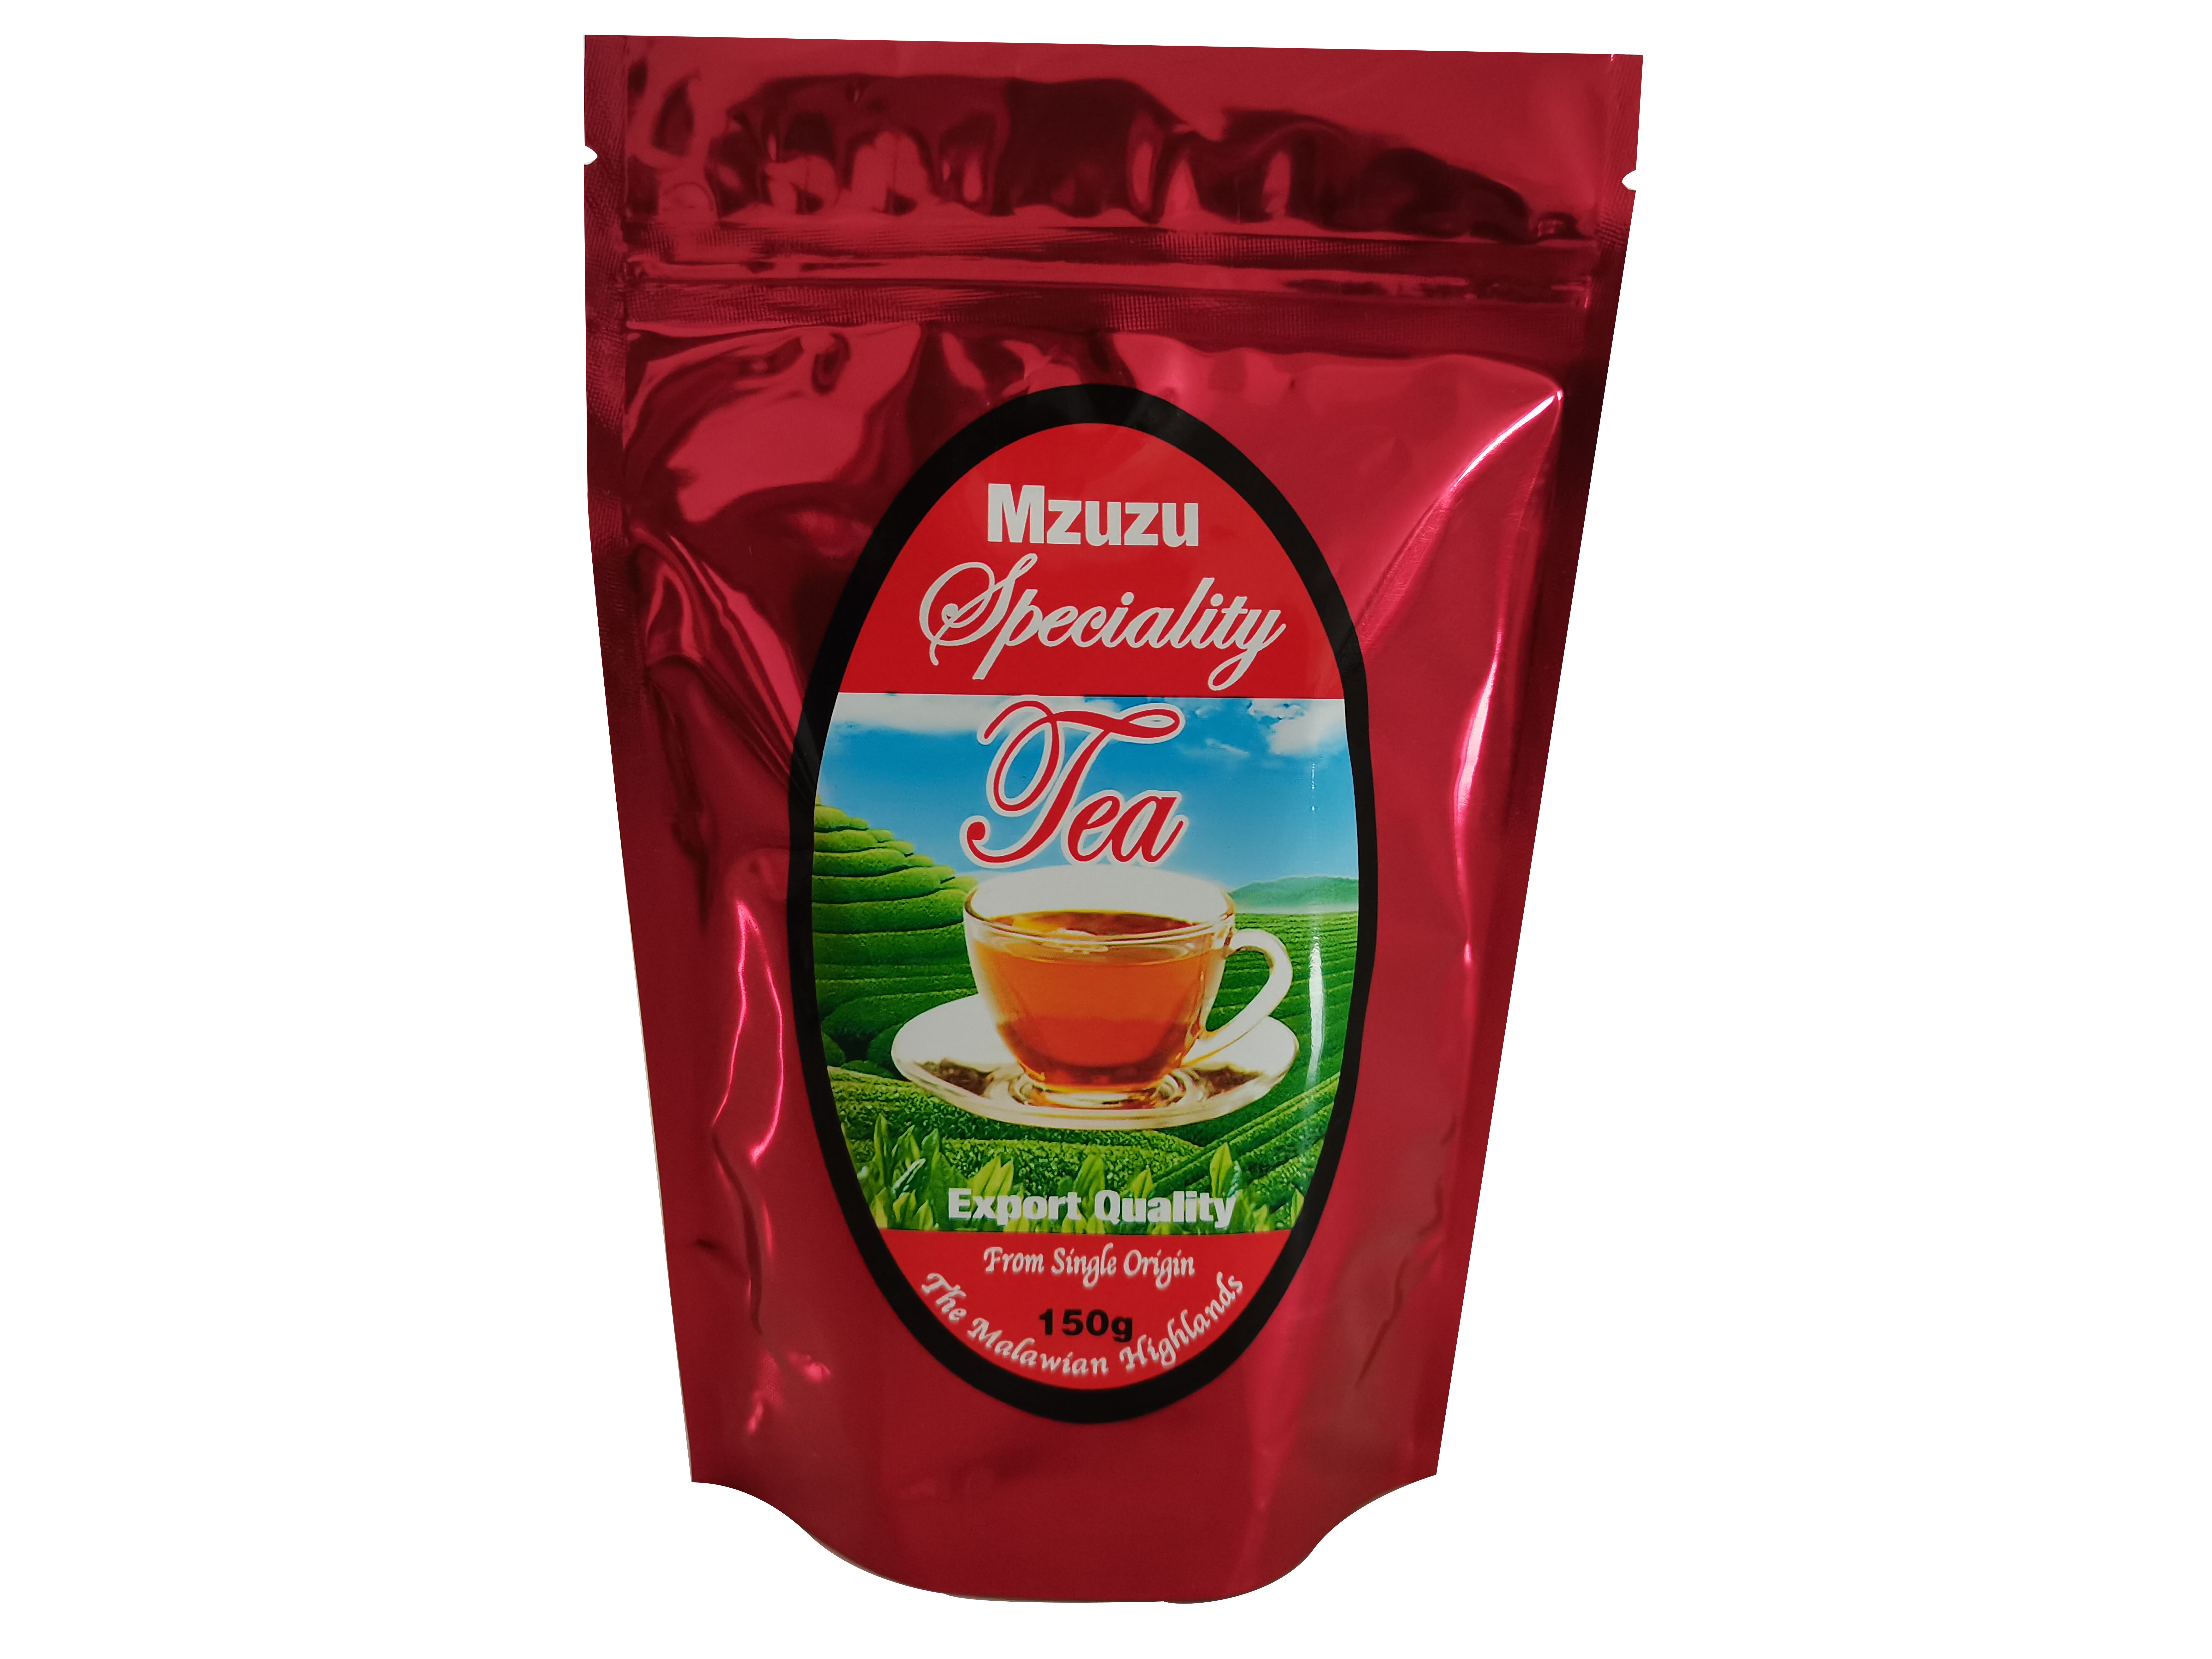 Foil finish stand up tea pouch